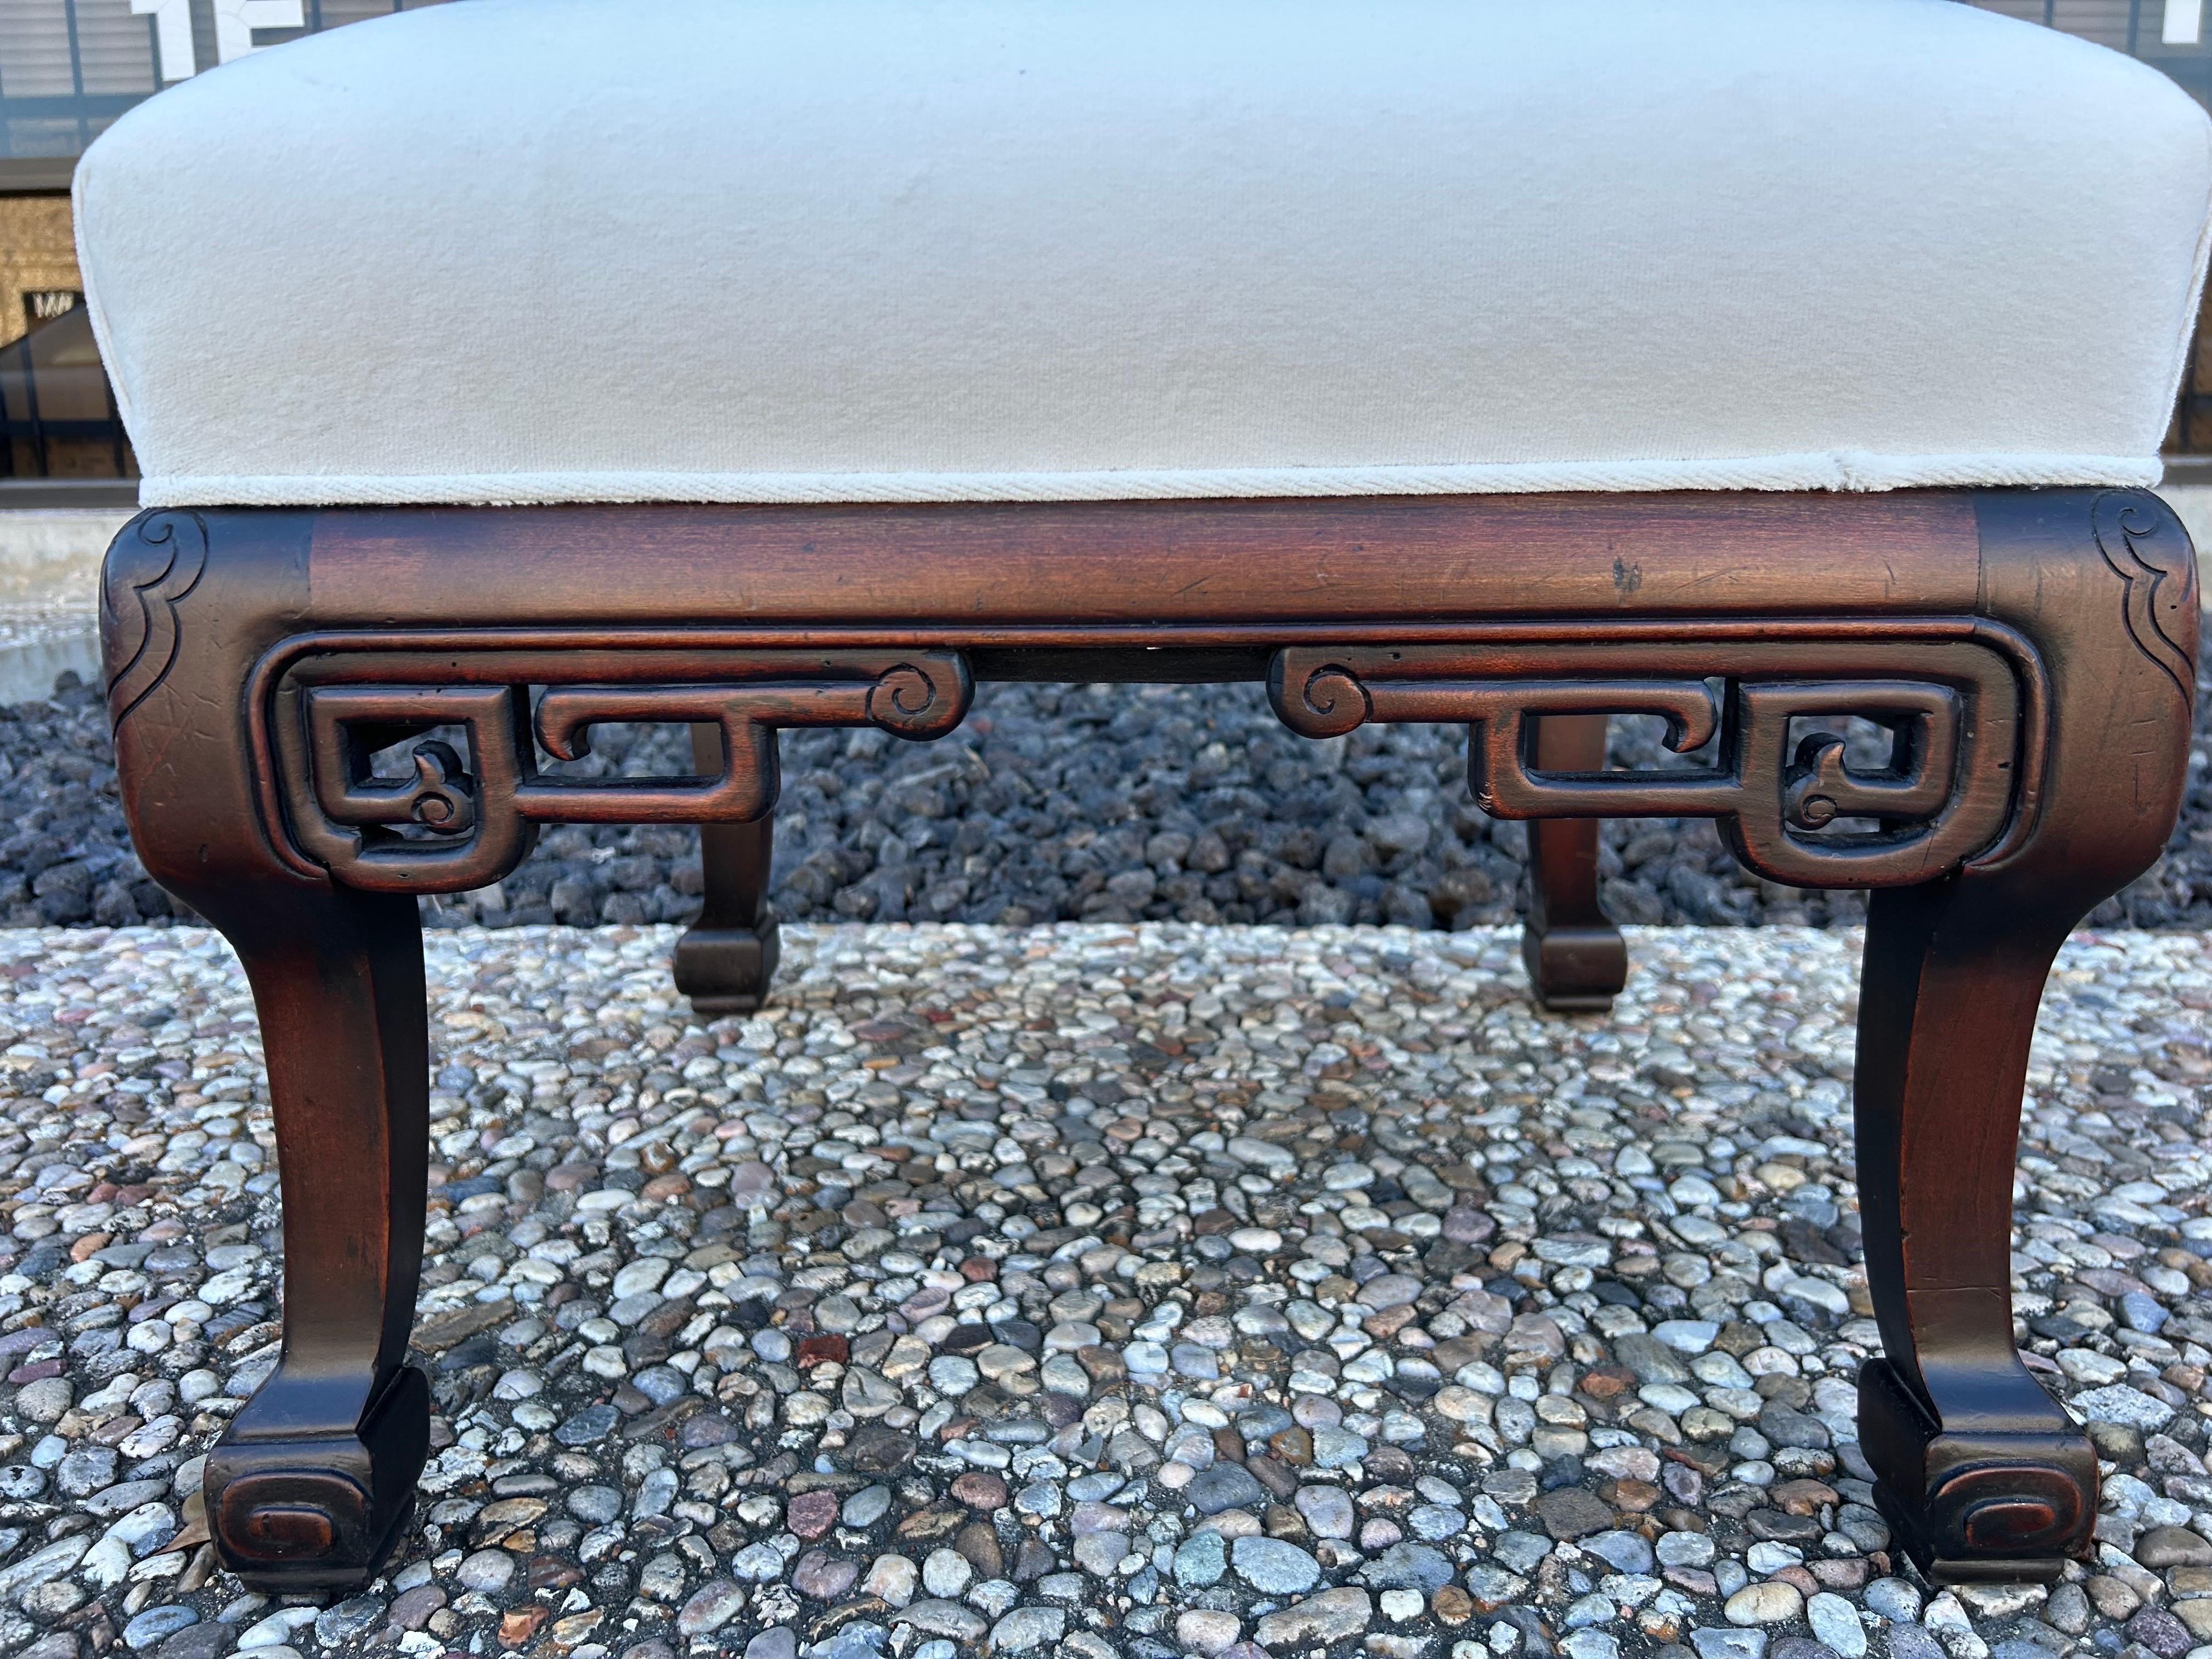 Chinese Export Antique Chinese Square Bench Or Ottoman For Sale